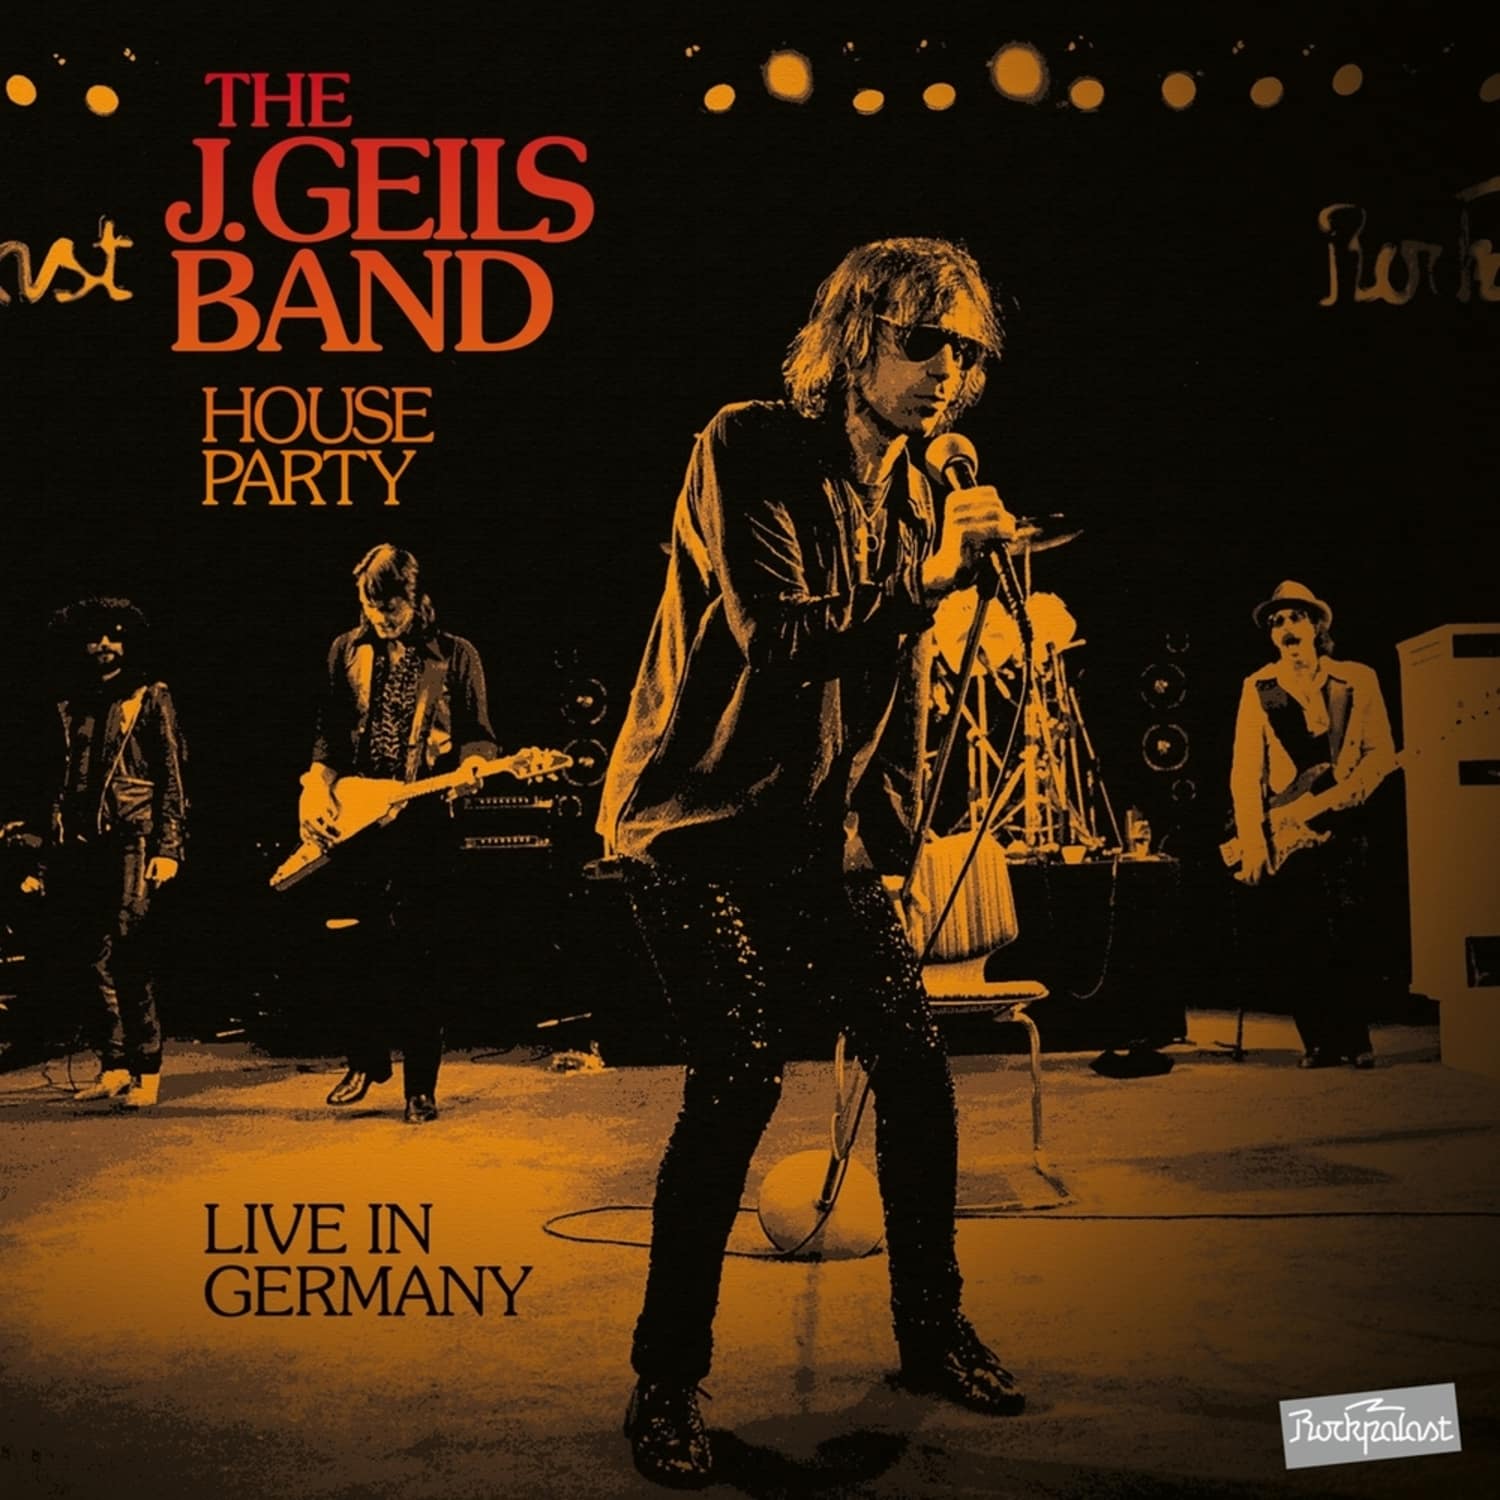 J. Geils Band - HOUSE PARTY LIVE IN GERMANY 